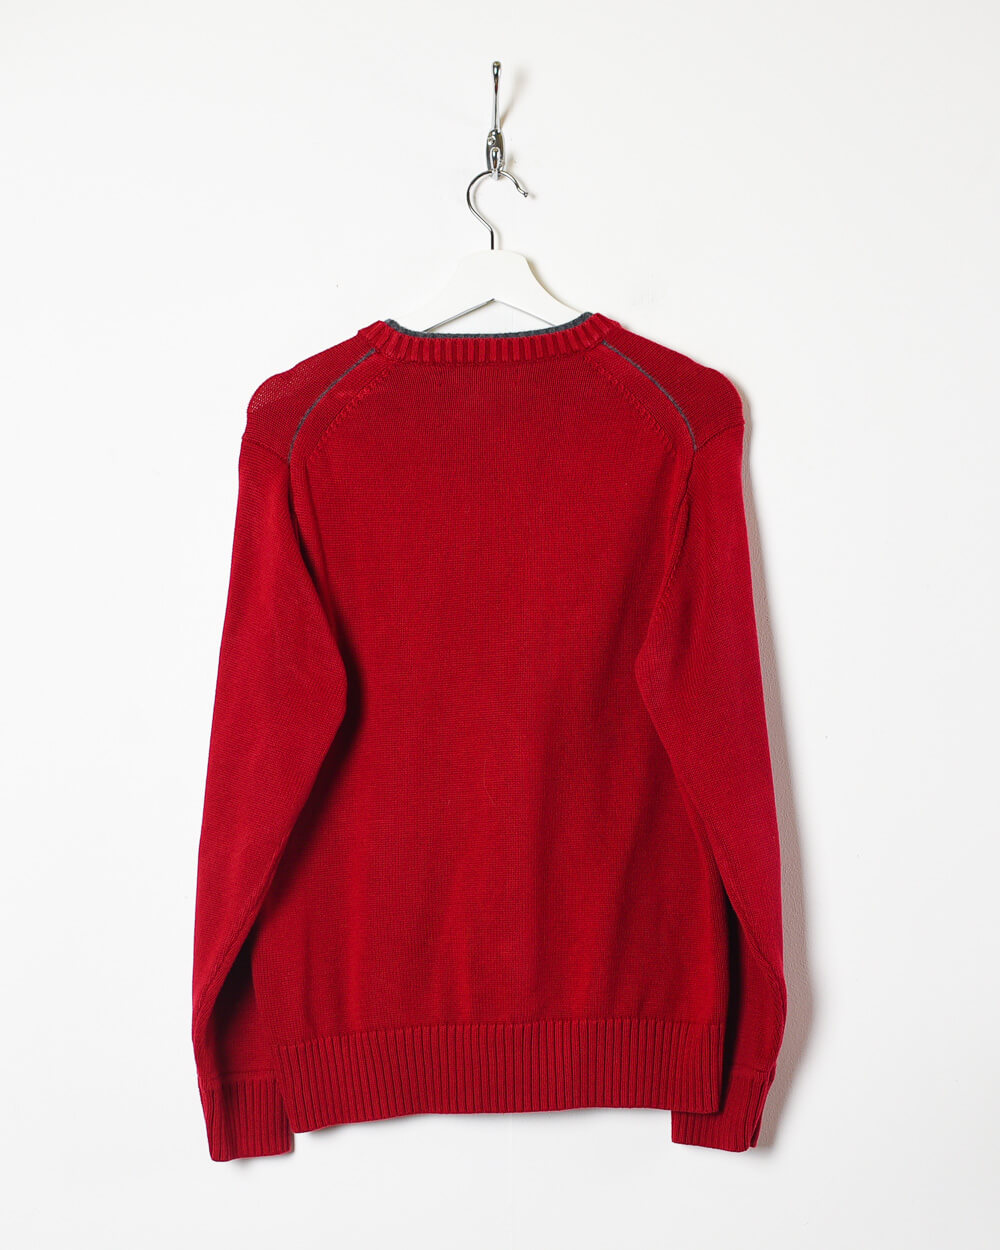 Red Tommy Hilfiger Knitted Sweatshirt - Small